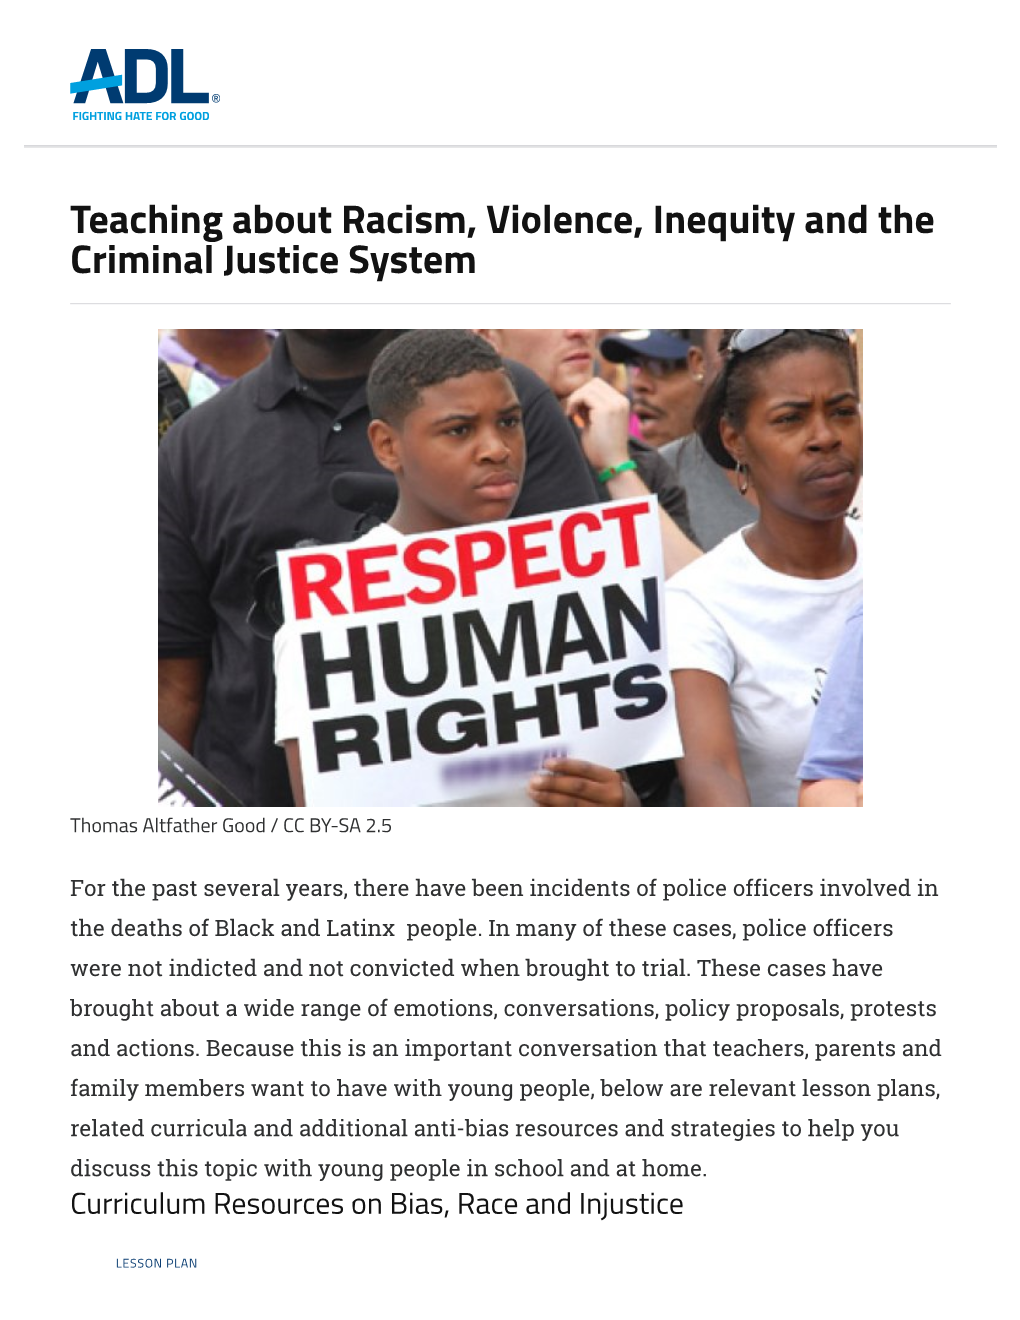 Teaching About Racism, Violence, Inequity and the Criminal Justice System